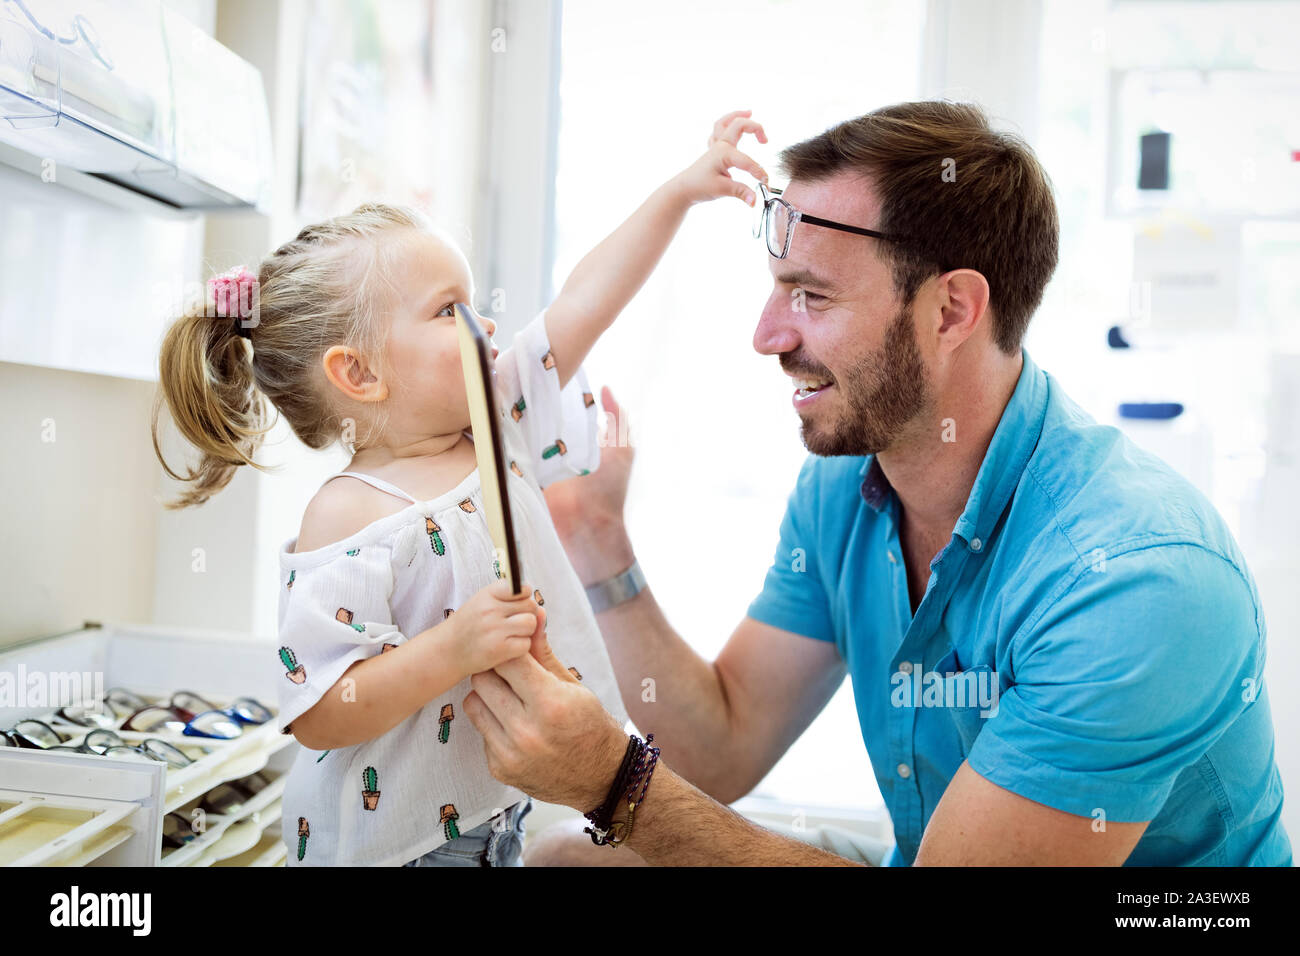 Health care, eyesight and vision concept. Little girl choosing glasses with father at optics store Stock Photo